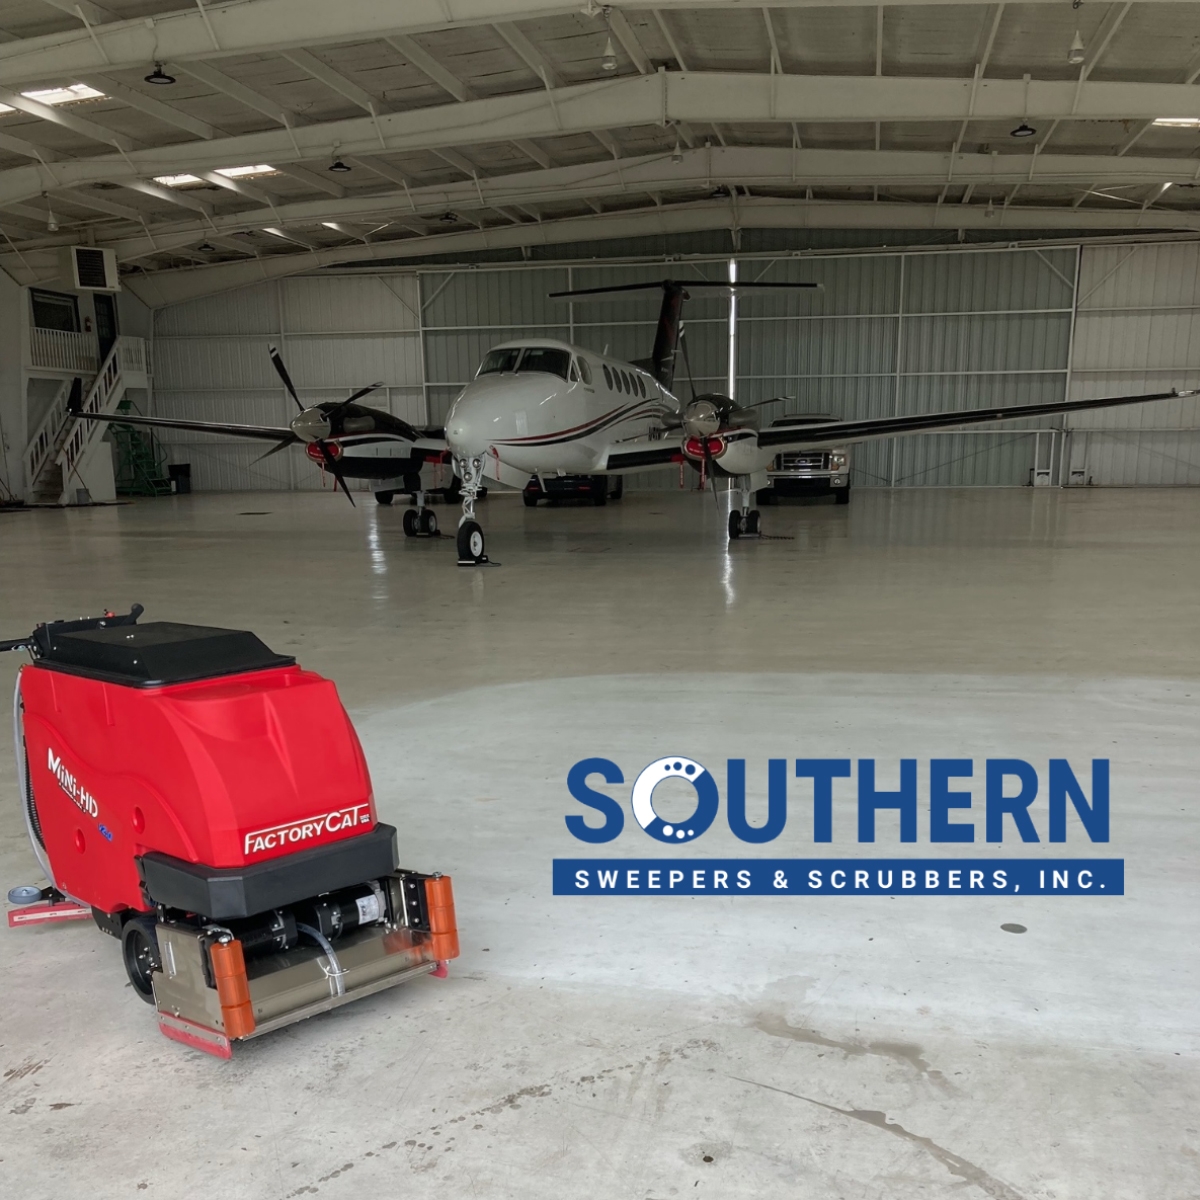 Your floor should look clean and crisp. Your operators will find the MINI-HD Floor Scrubber easy to maneuver into tight areas, and simple to service. The deck is protected by steel guards and large polyurethane rollers to keep the unit from marking walls.